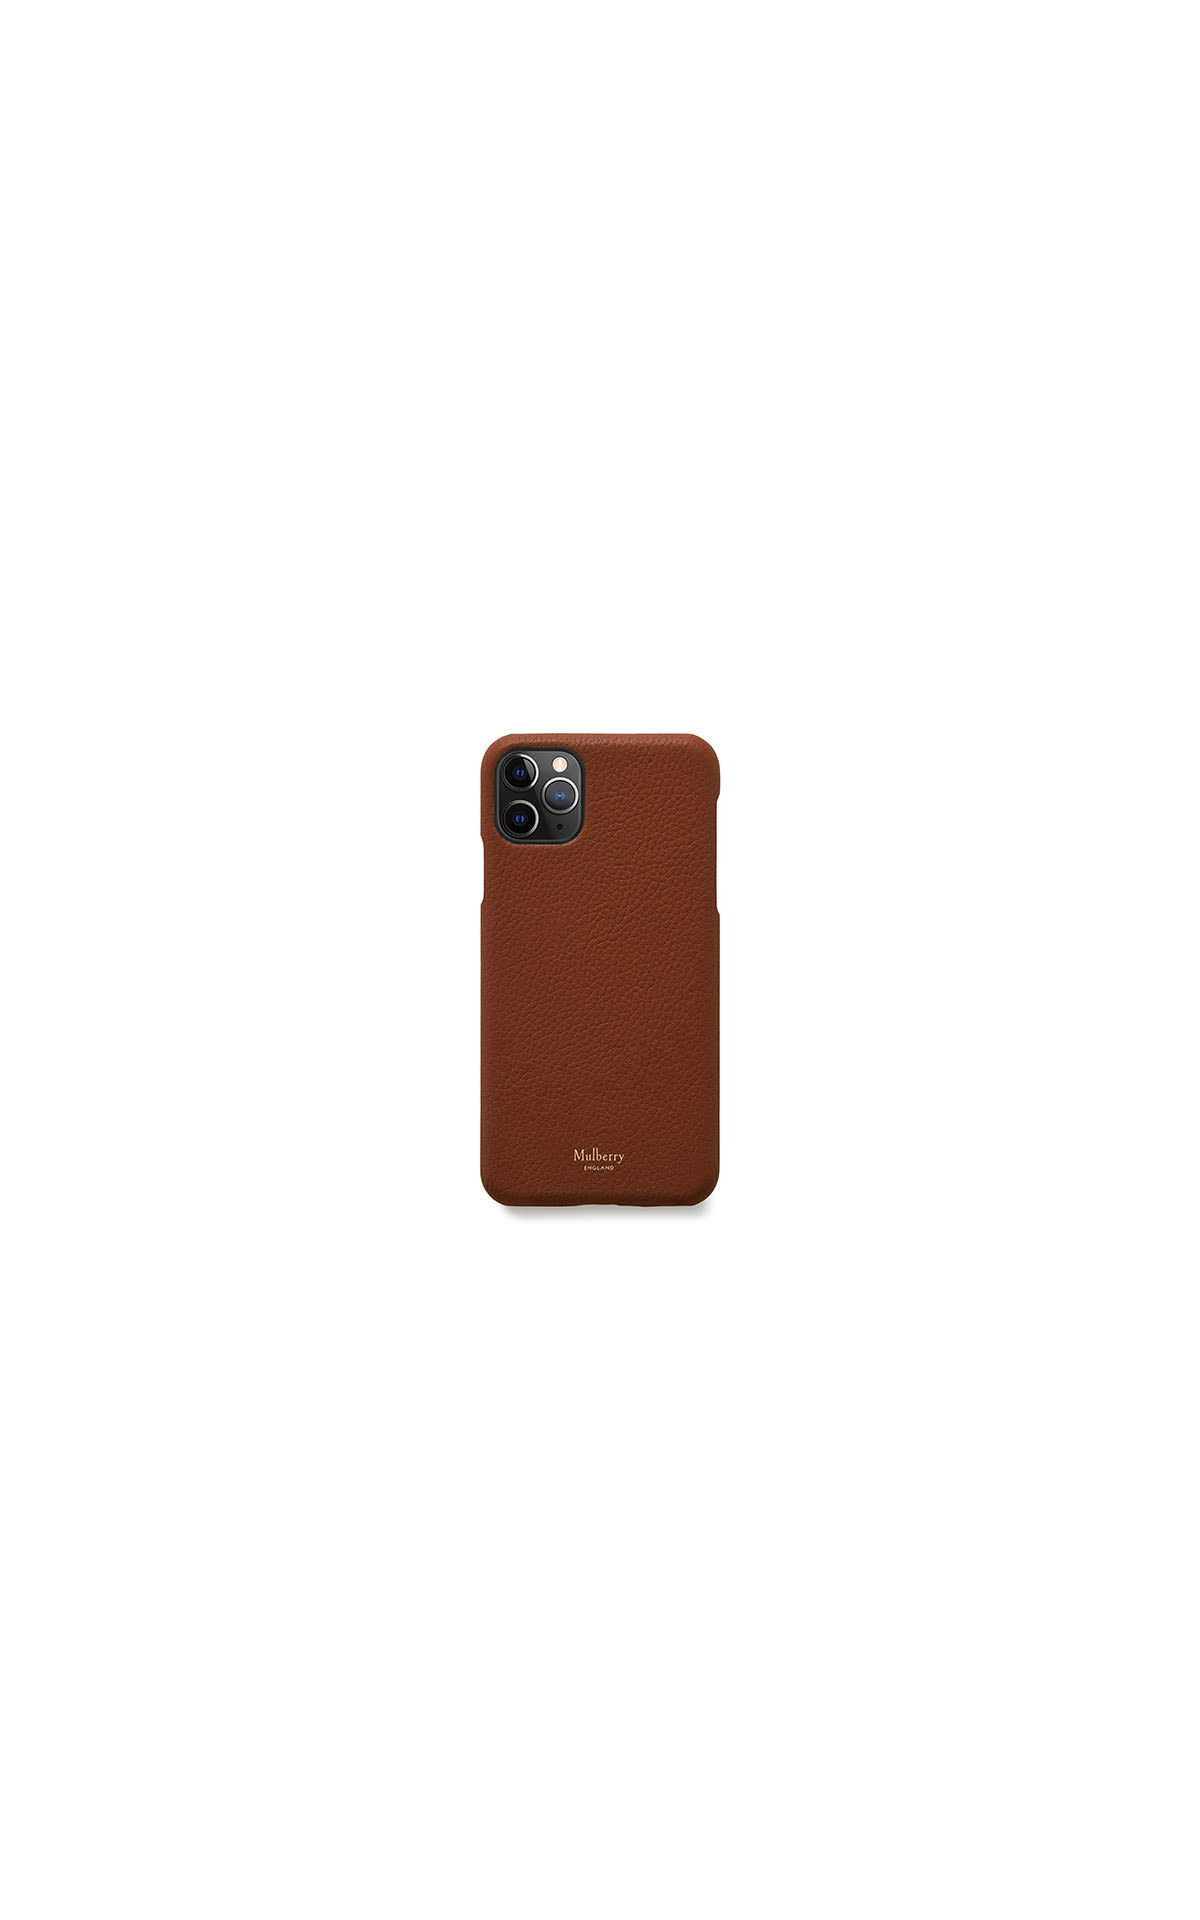 Mulberry iPhone 11 pro max cover small classic Gr oak from Bicester Village